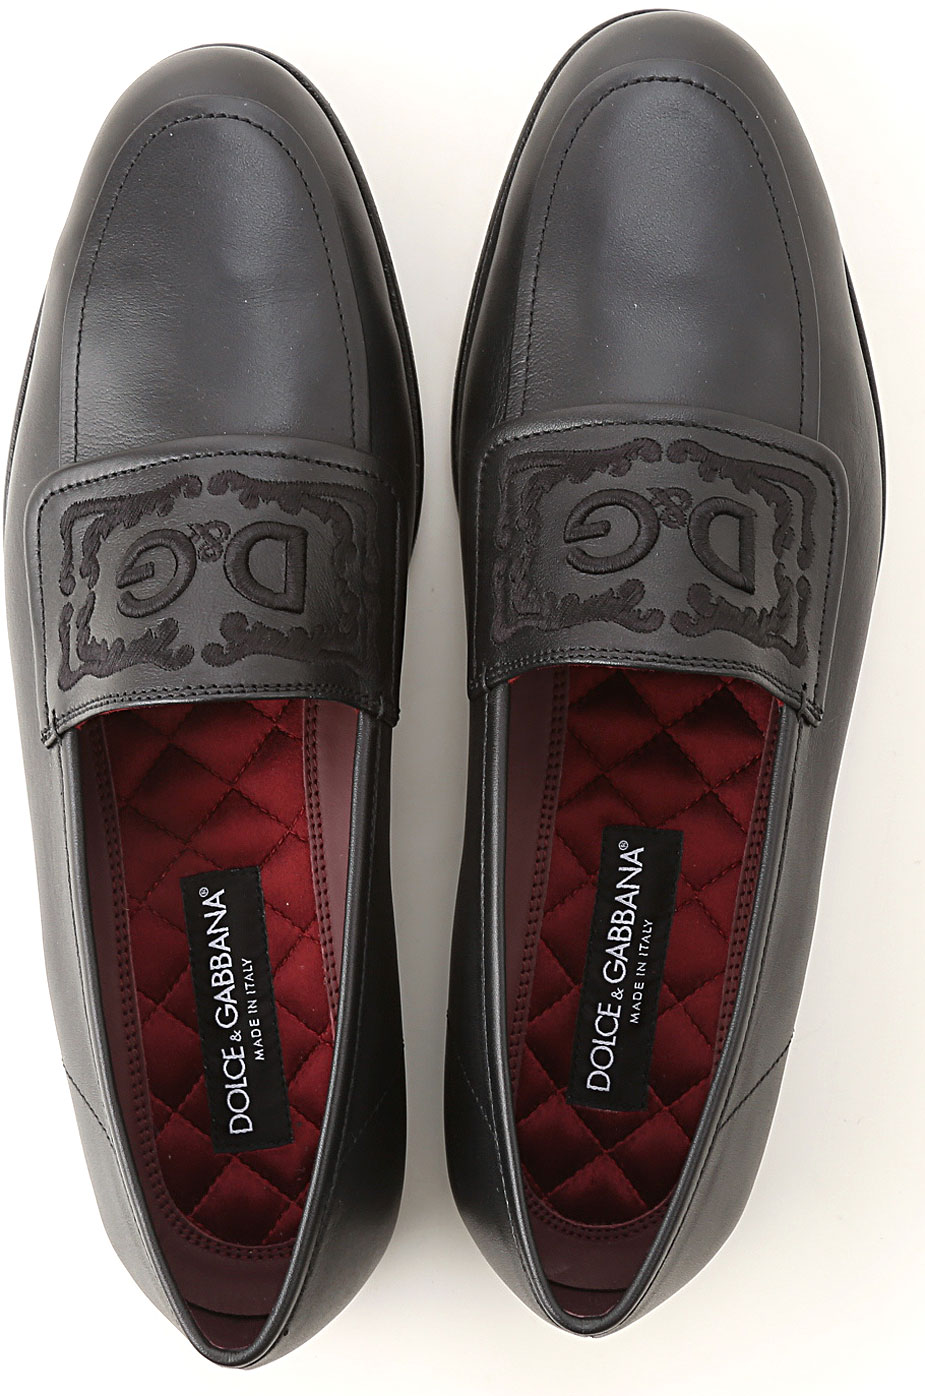 Mens Shoes Dolce & Gabbana, Style code: a50253-ac355-80999